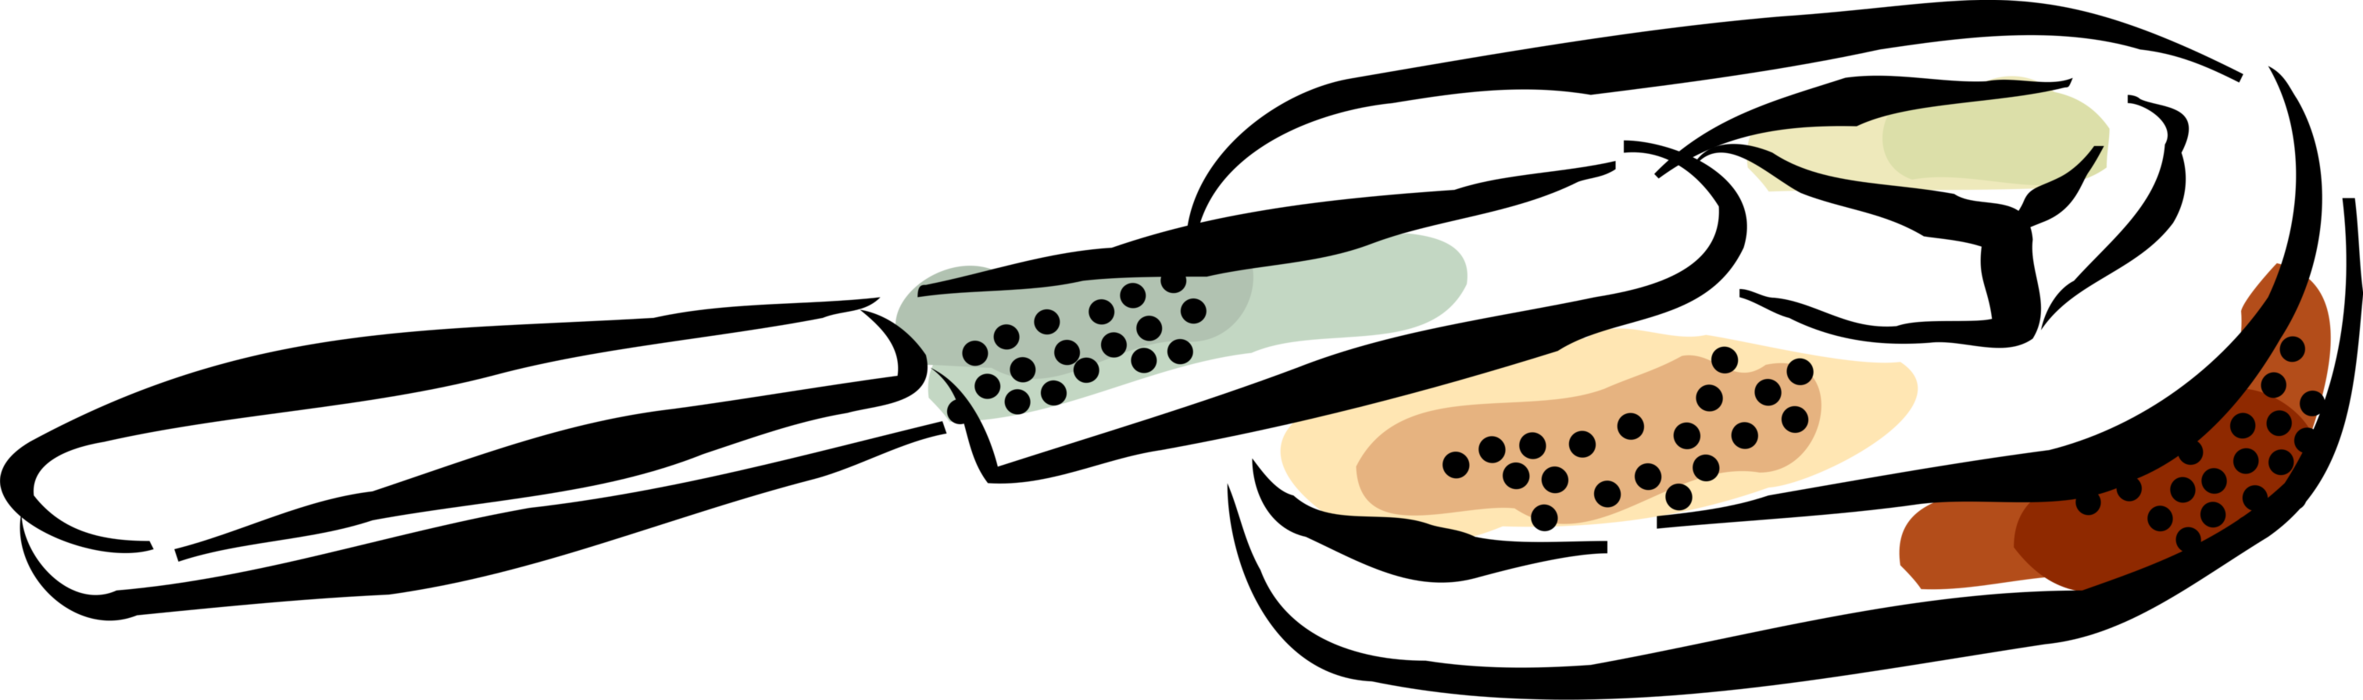 Vector Illustration of Staple Food Baked Bread Slice Prepared from Flour and Water Dough Served with Butter